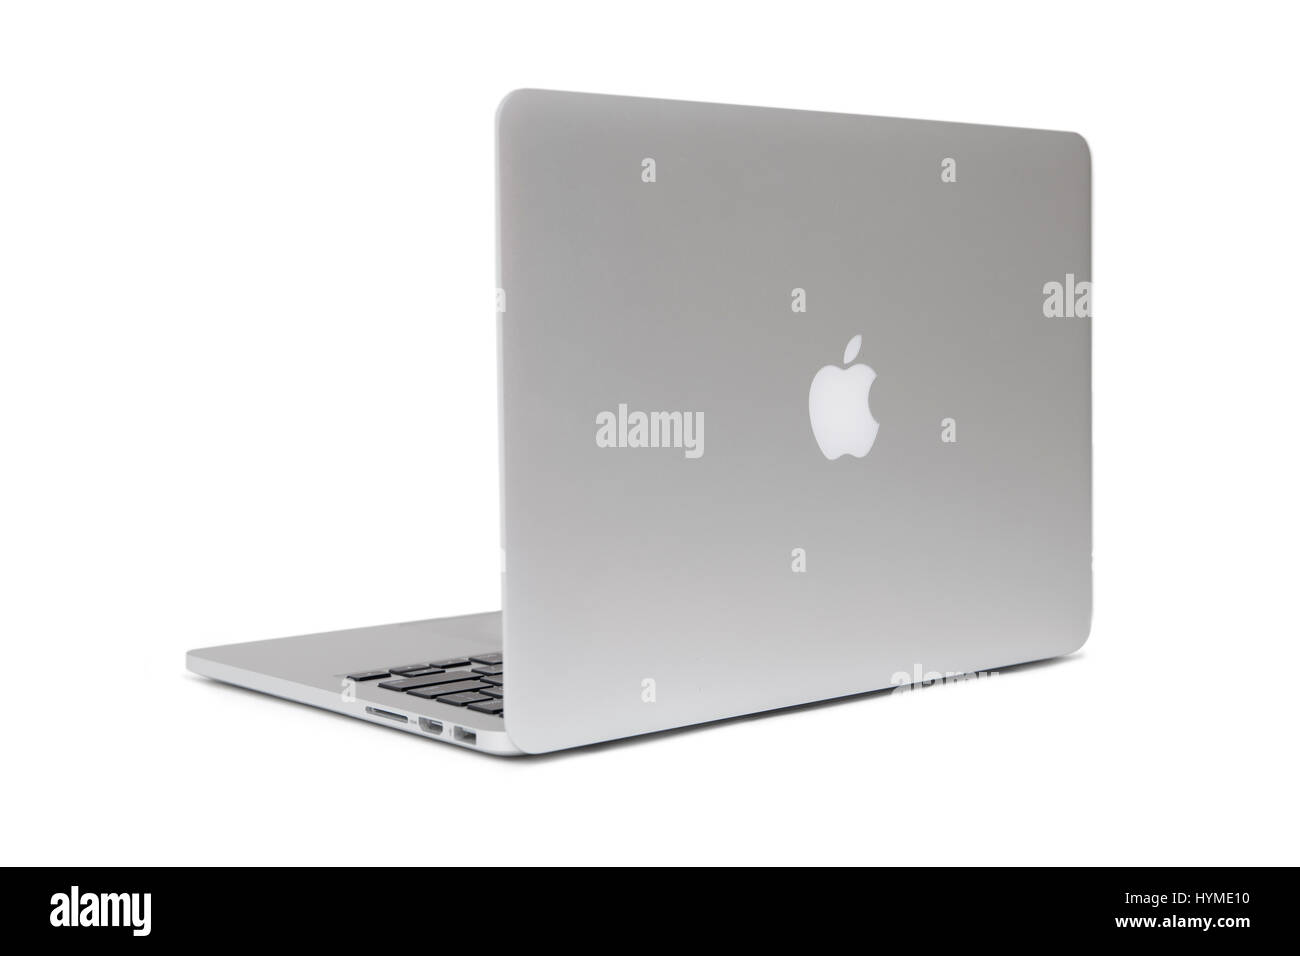 BELGRADE, SERBIA - MARCH 3, 2017: MacBook computer isolated on white. The MacBook is a brand of notebook computers manufactured by Apple Inc. Stock Photo